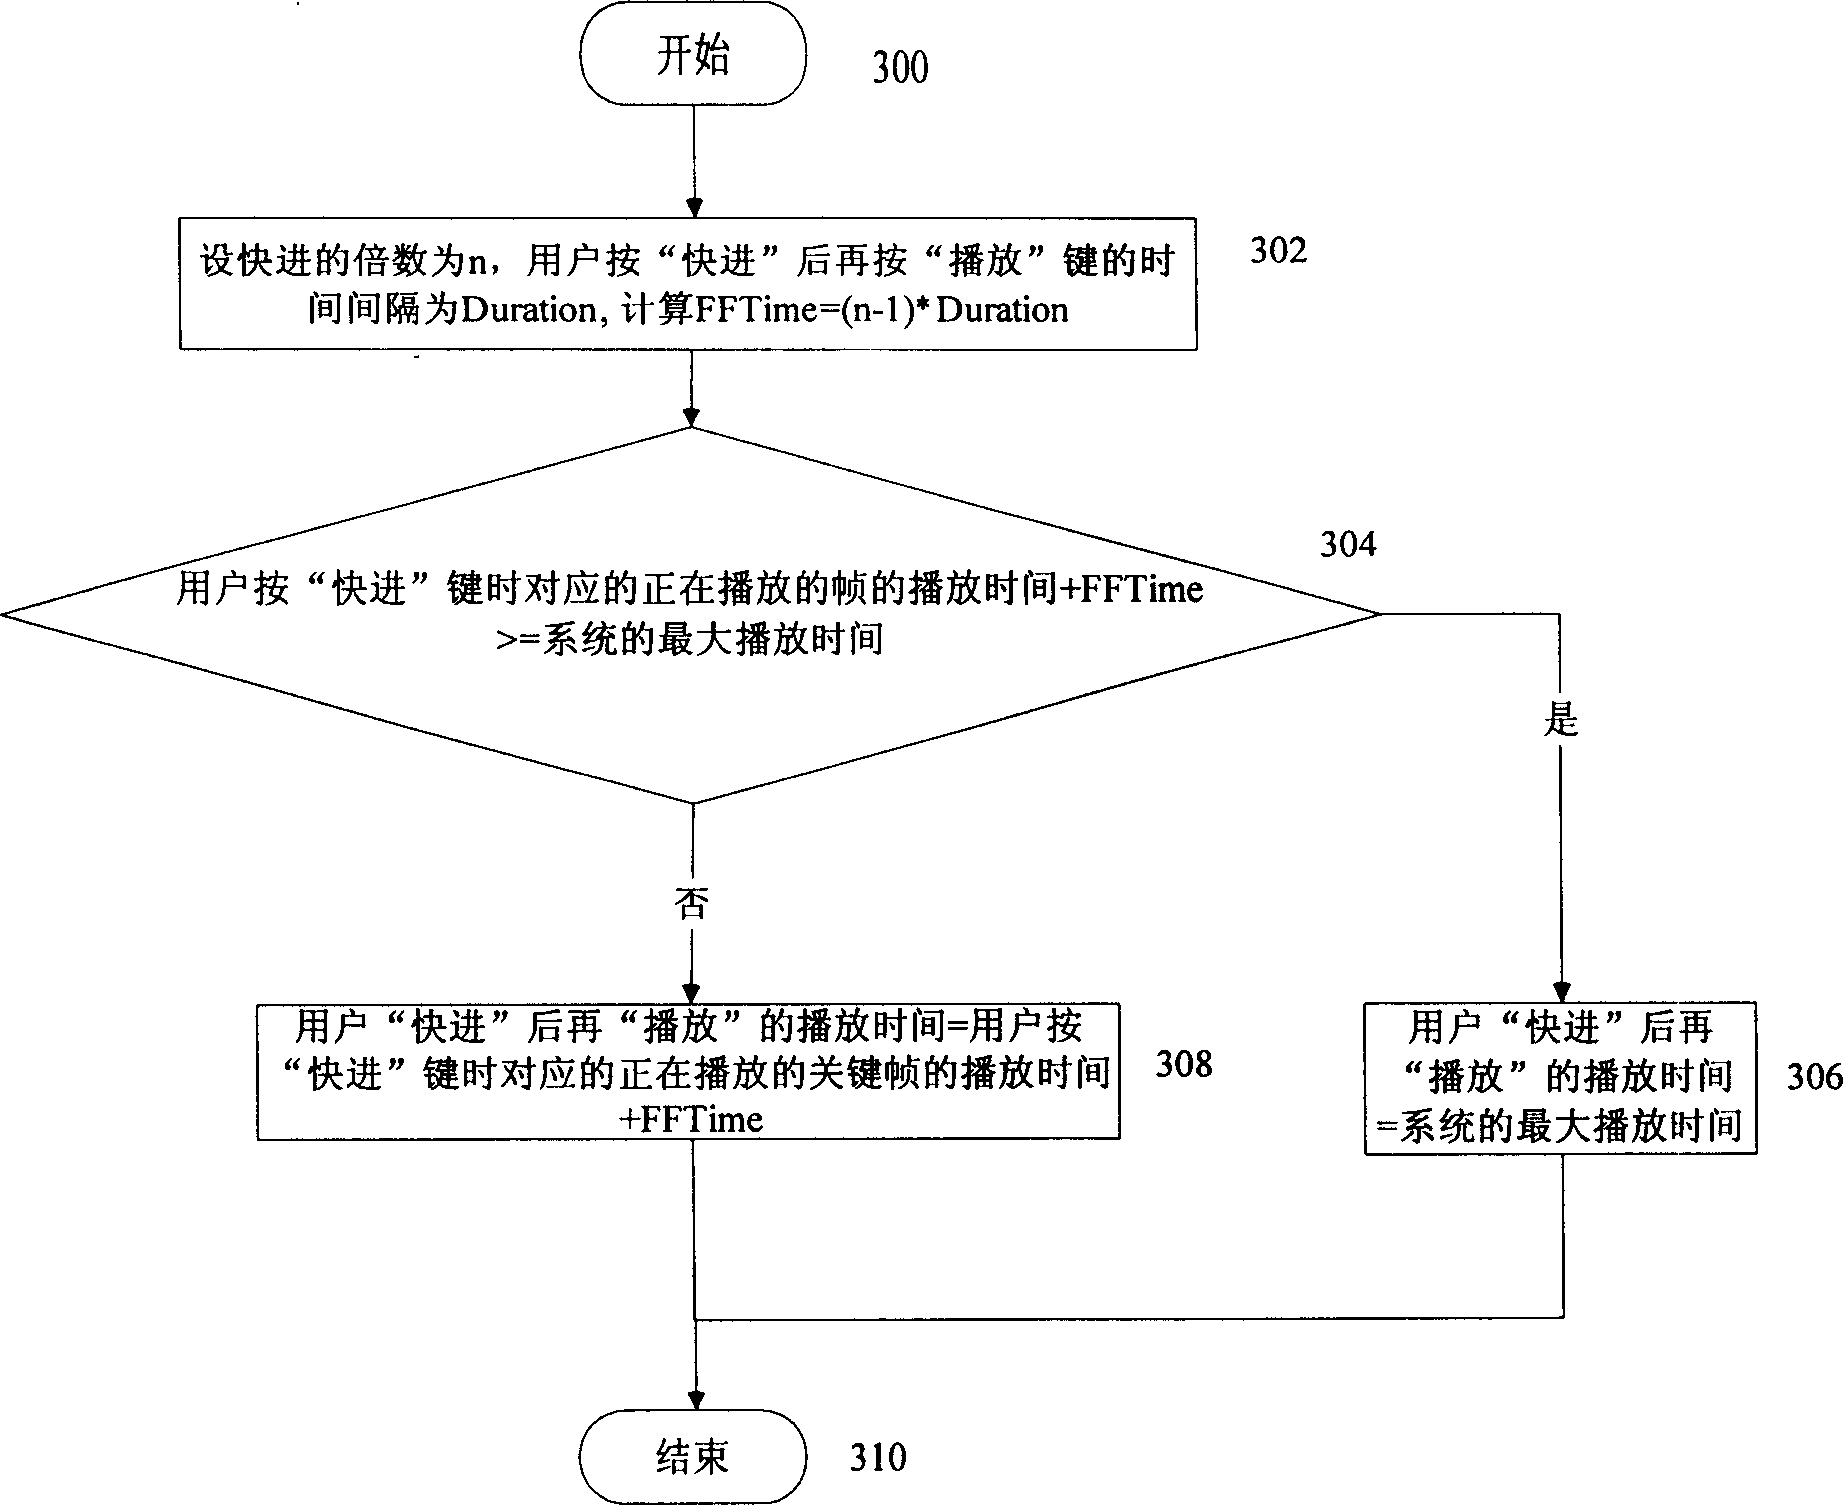 Method for network interaction television system realizing time-shift function